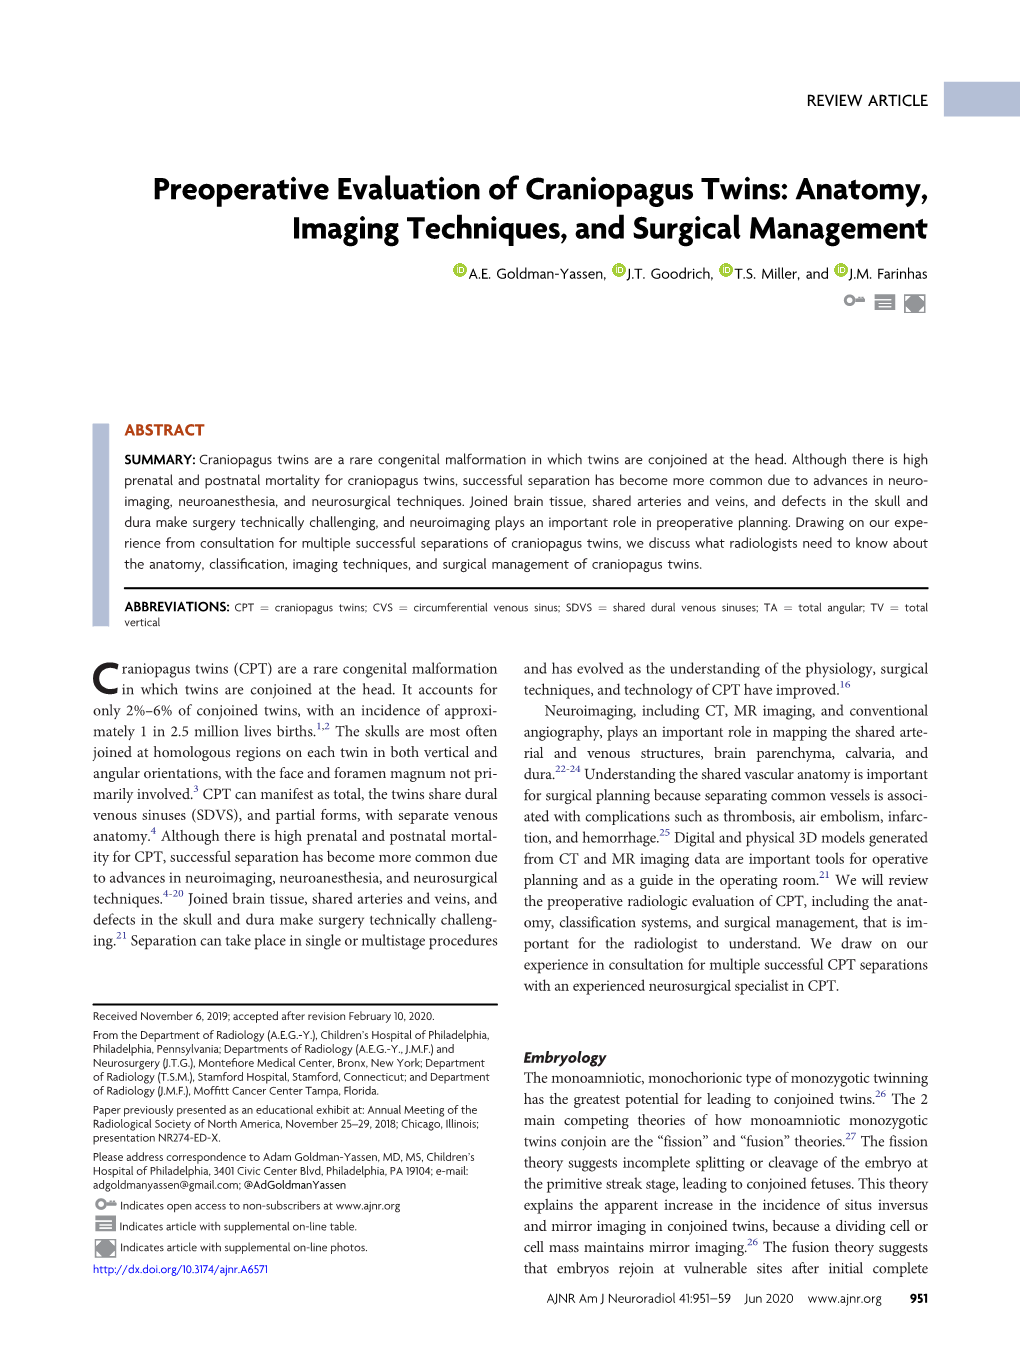 Preoperative Evaluation of Craniopagus Twins: Anatomy, Imaging Techniques, and Surgical Management